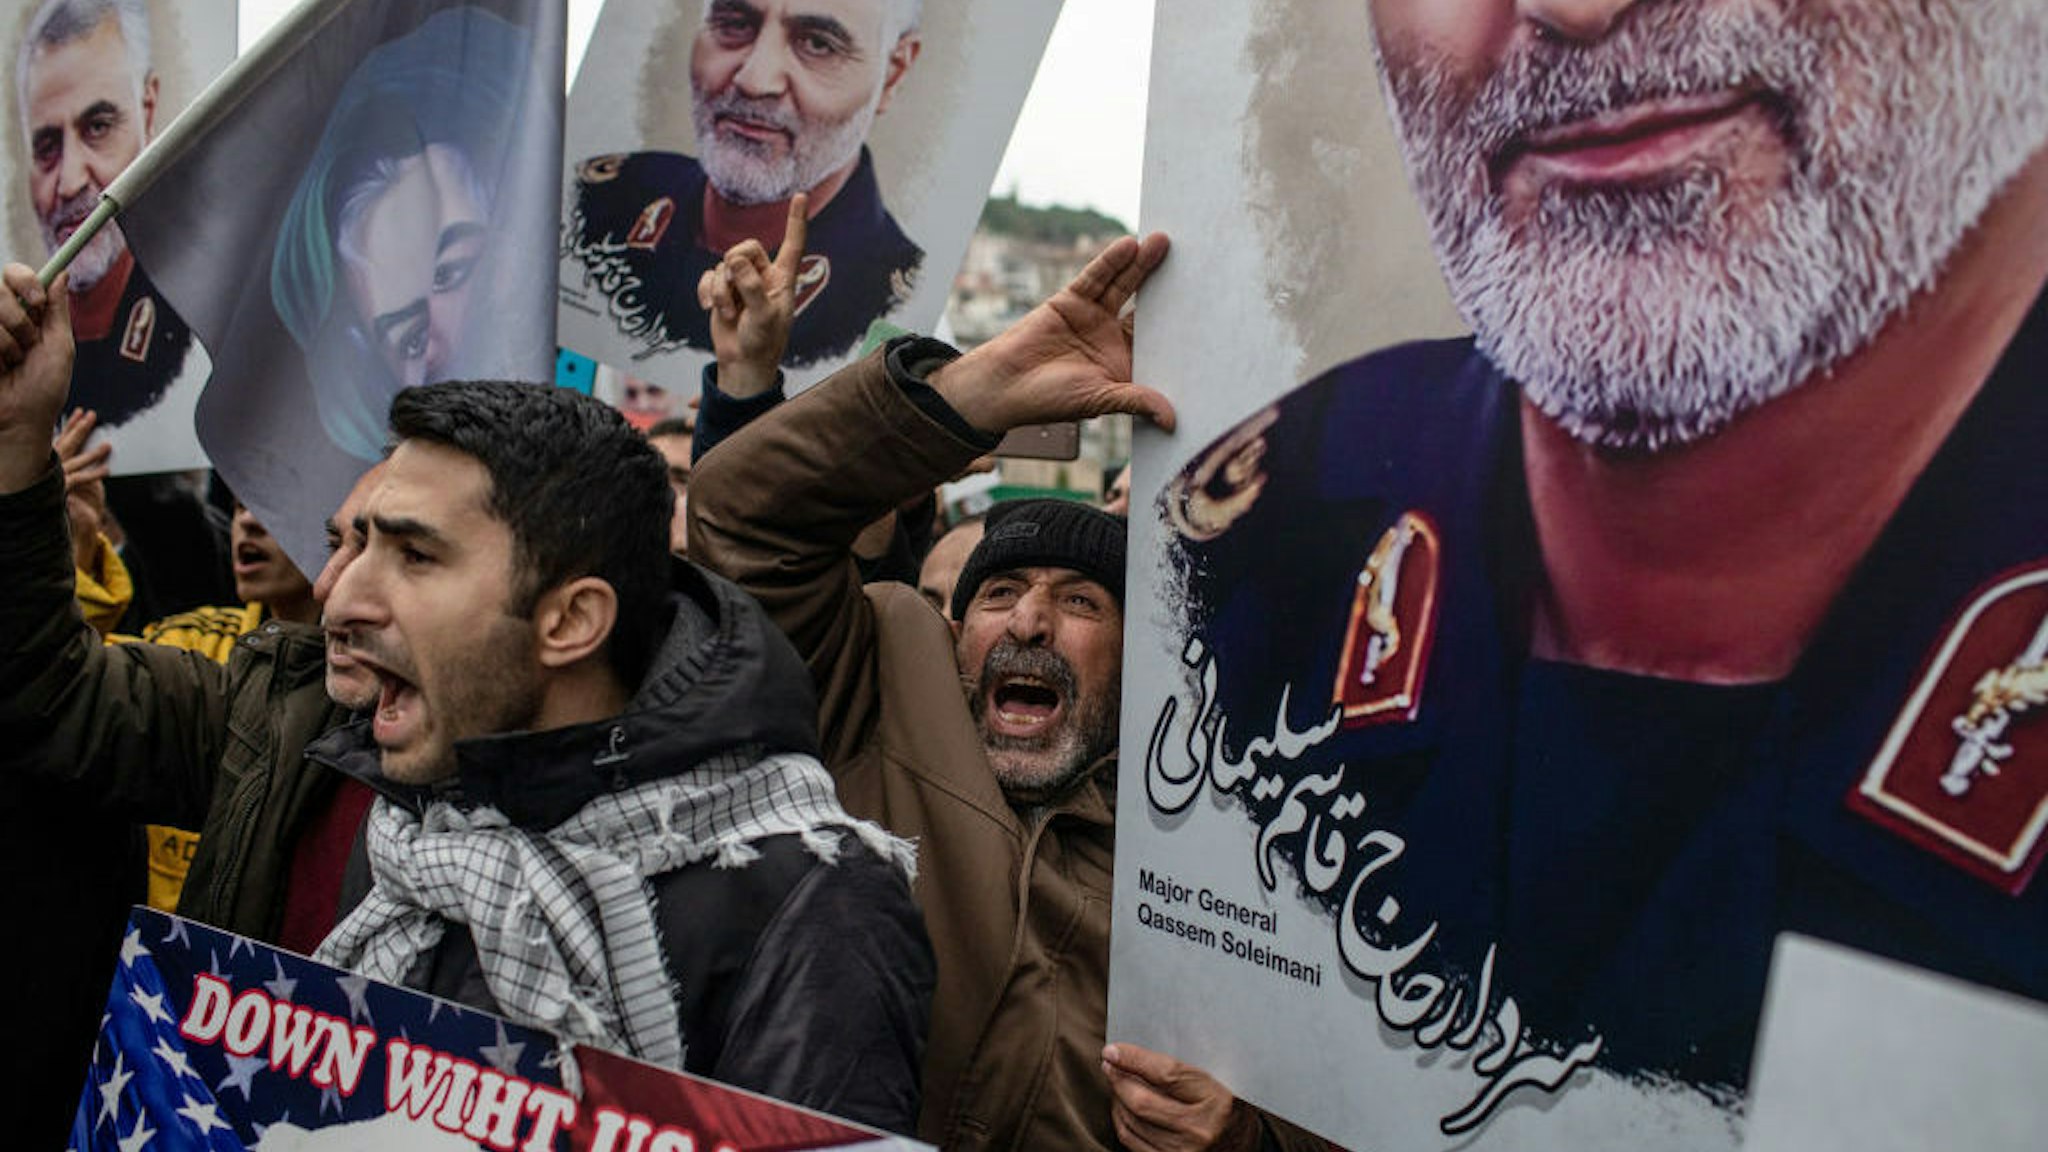 People hold posters showing the portrait of Iranian Revolutionary Guard Major General Qassem Soleimani and chant slogans during a protest outside the U.S. Consulate on January 05, 2020 in Istanbul, Turkey. Major General Qassem Soleimani, was killed by a U.S. drone strike outside the Baghdad Airport on January 3. Since the incident, tensions have risen across the Middle East. (Photo by Chris McGrath/Getty Images)